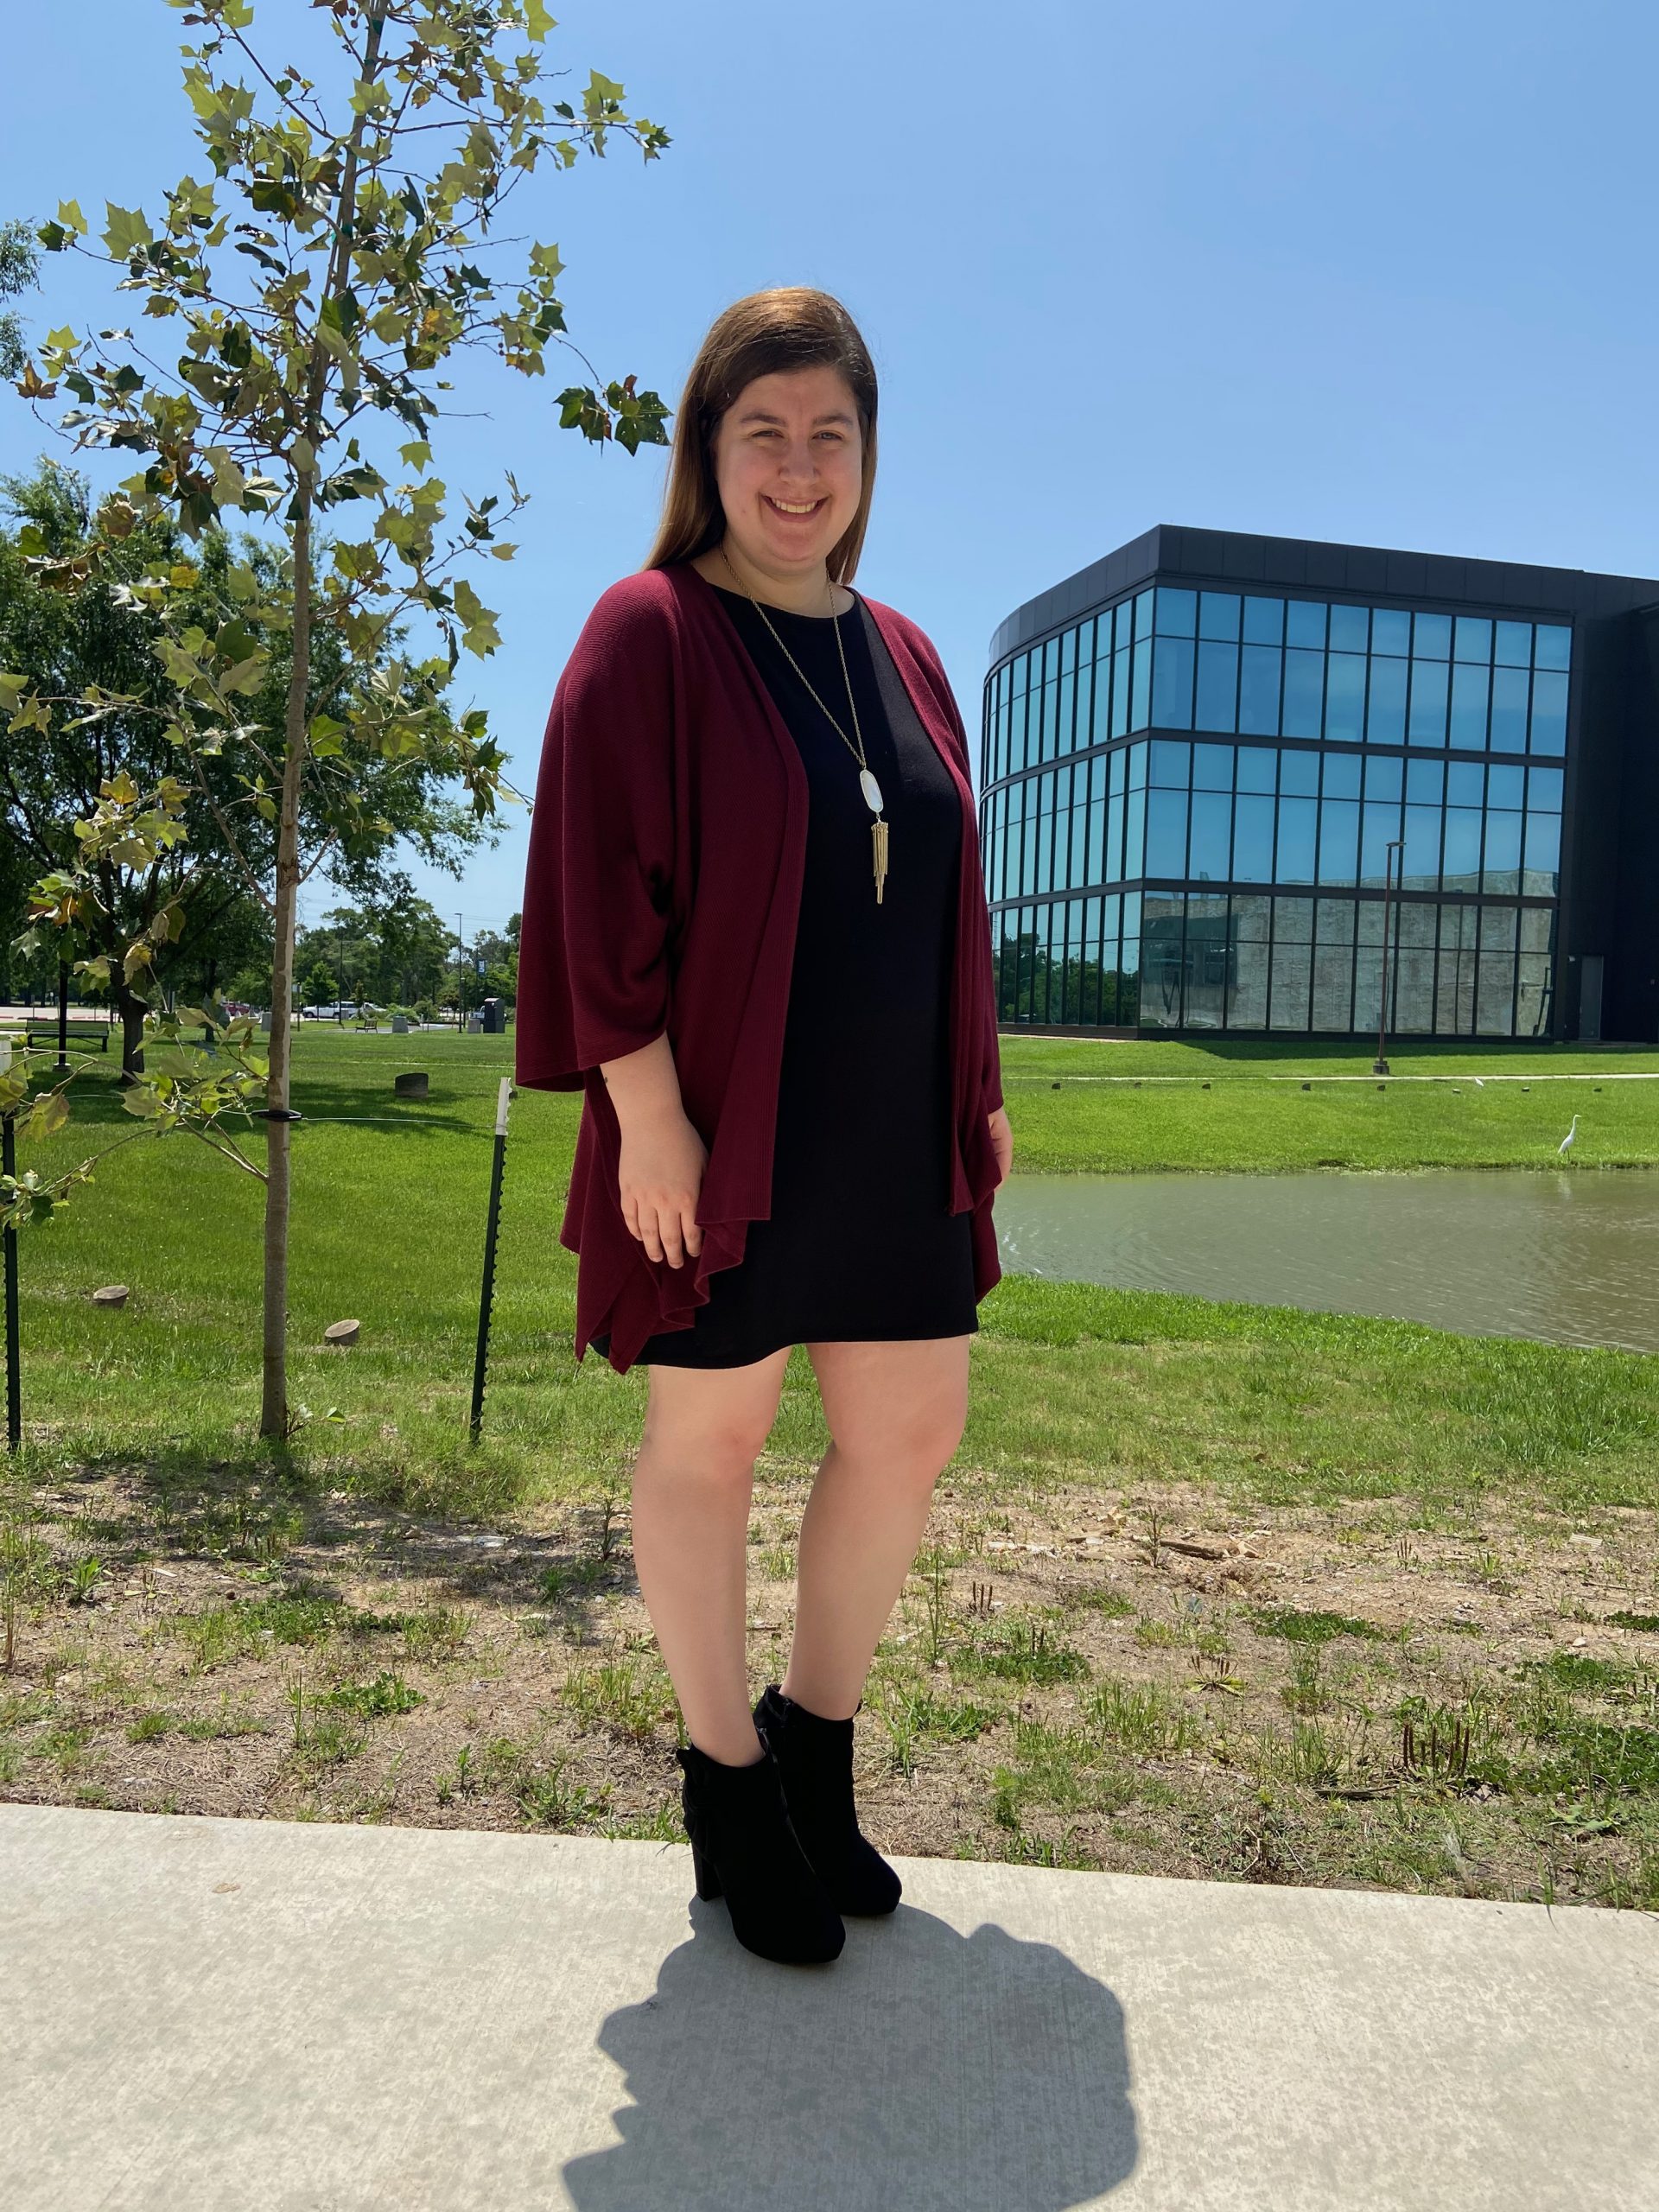 PHOTO: Signal reporter wearing a black dress, a cardigan, black booties and a necklace for an office look. Photo by The Signal reporter Jenna Schaub